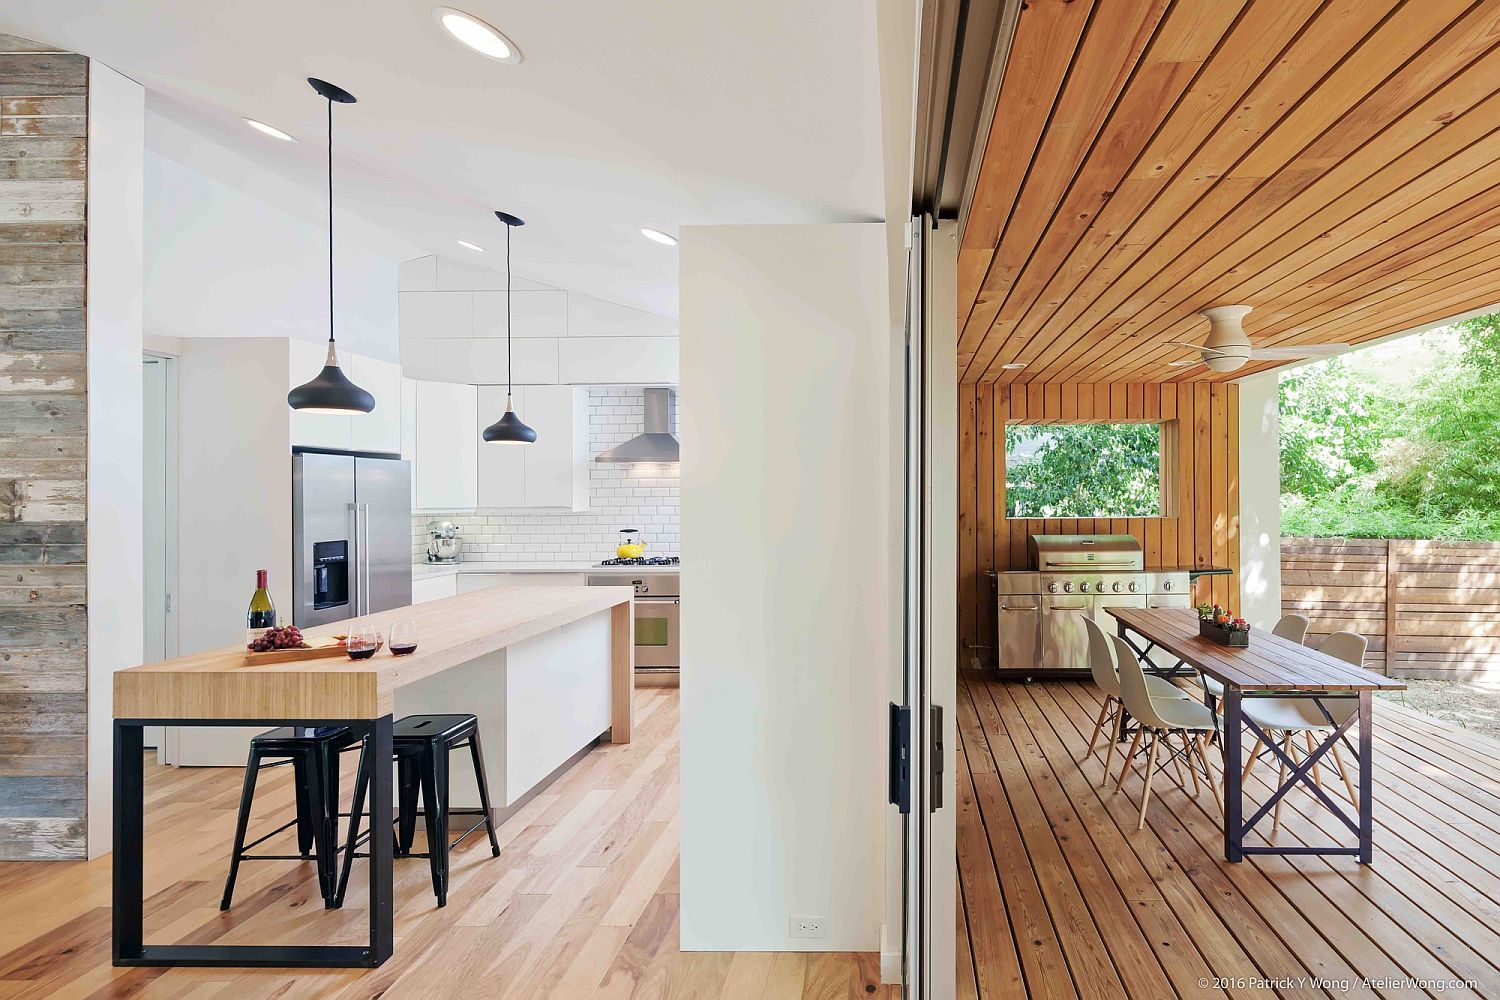 Kitchen-connected-with-the-wooden-deck-outside-has-an-extended-breakfast-zone